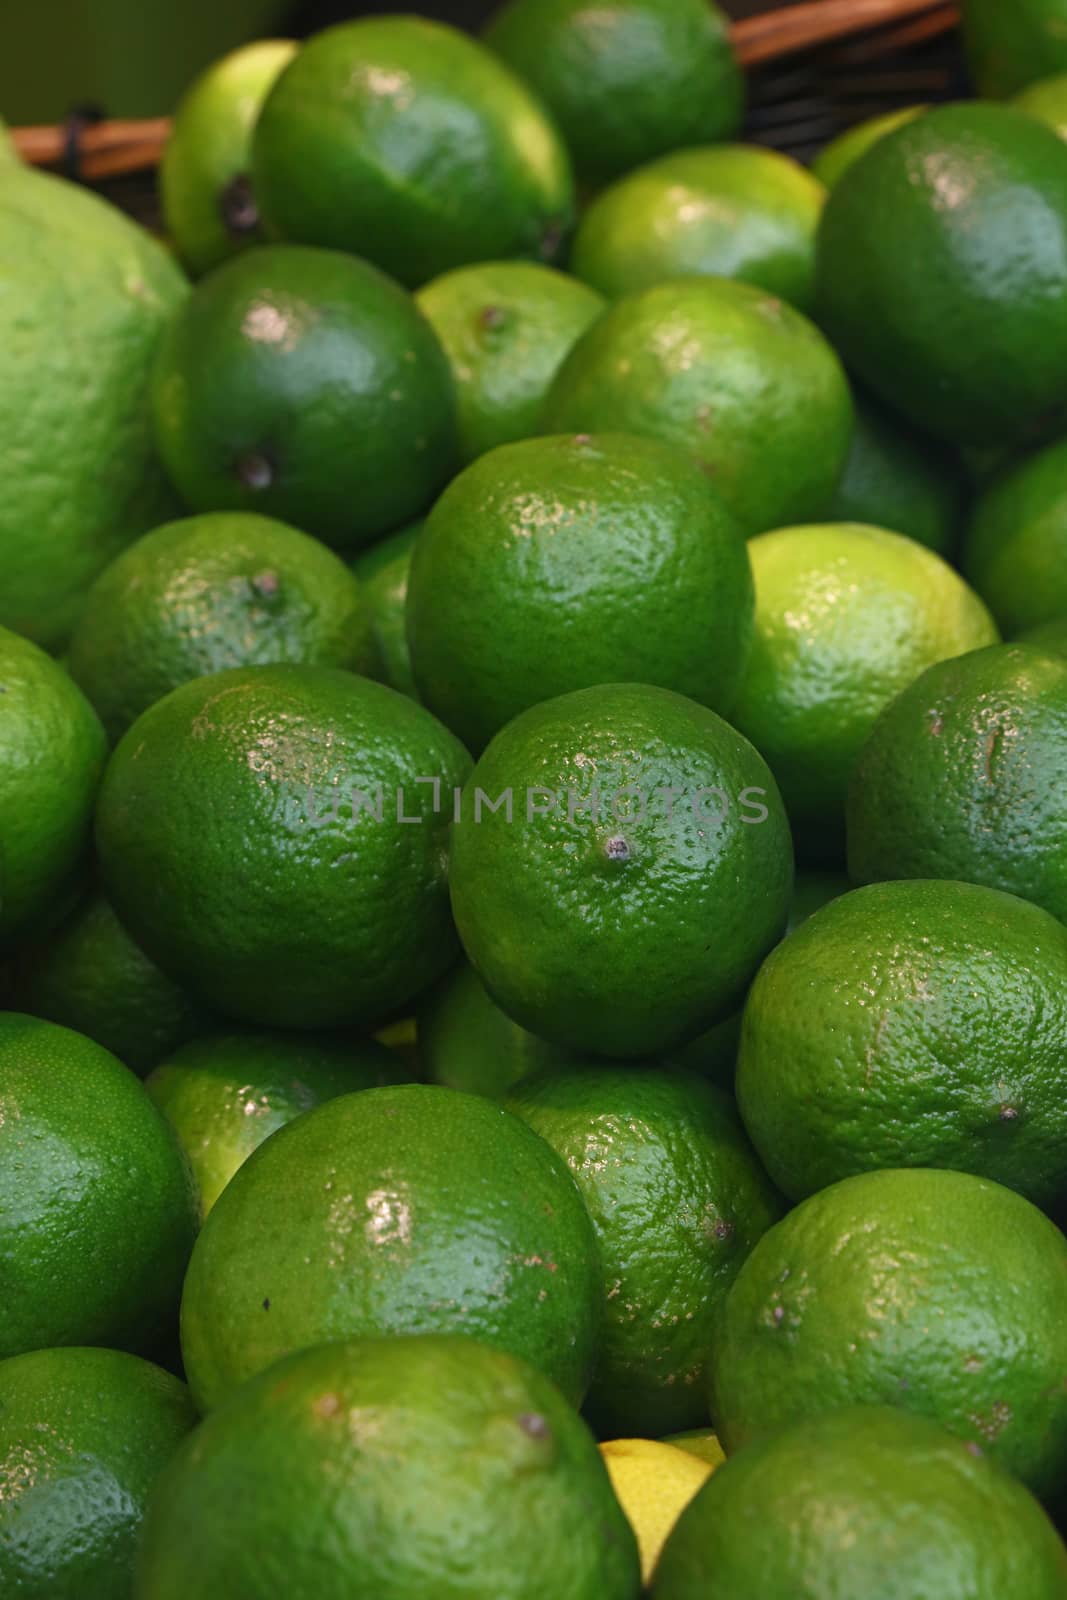 Heap of fresh green ripe lime fruits on retail market stall display, close up, high angle view